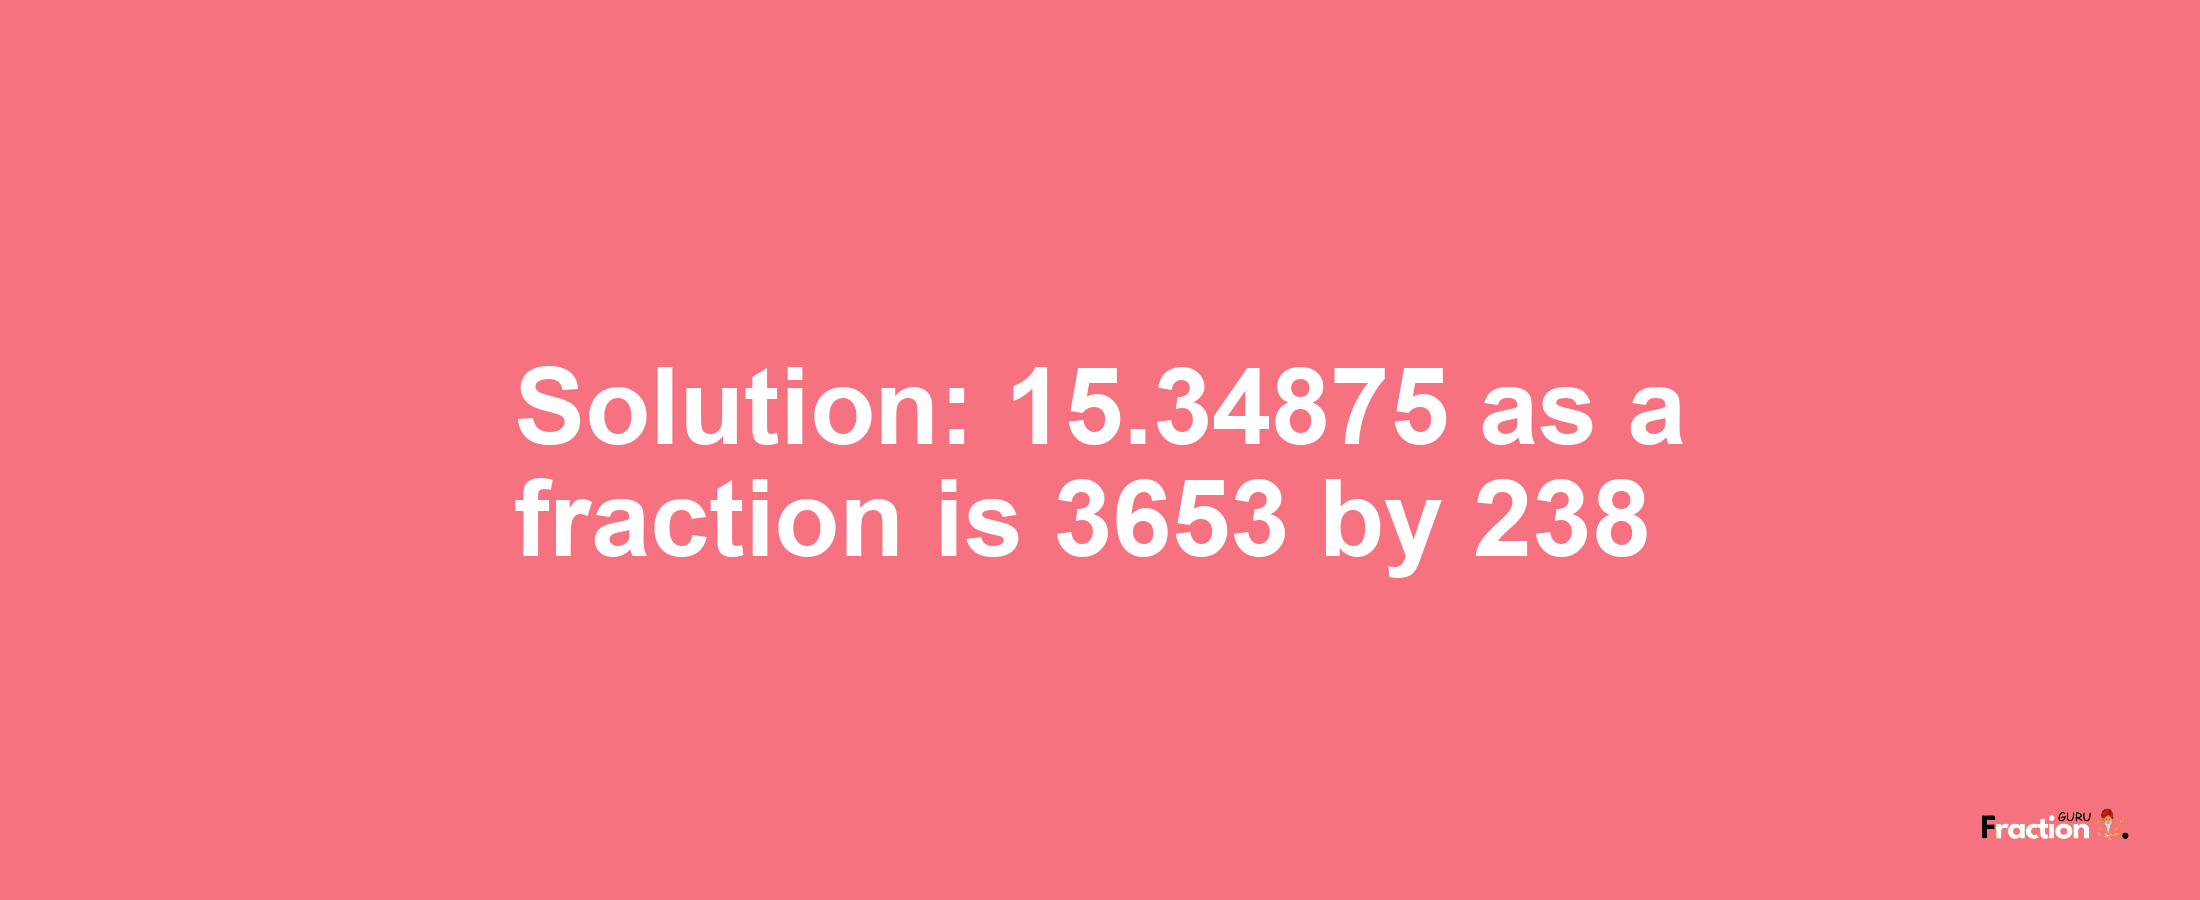 Solution:15.34875 as a fraction is 3653/238